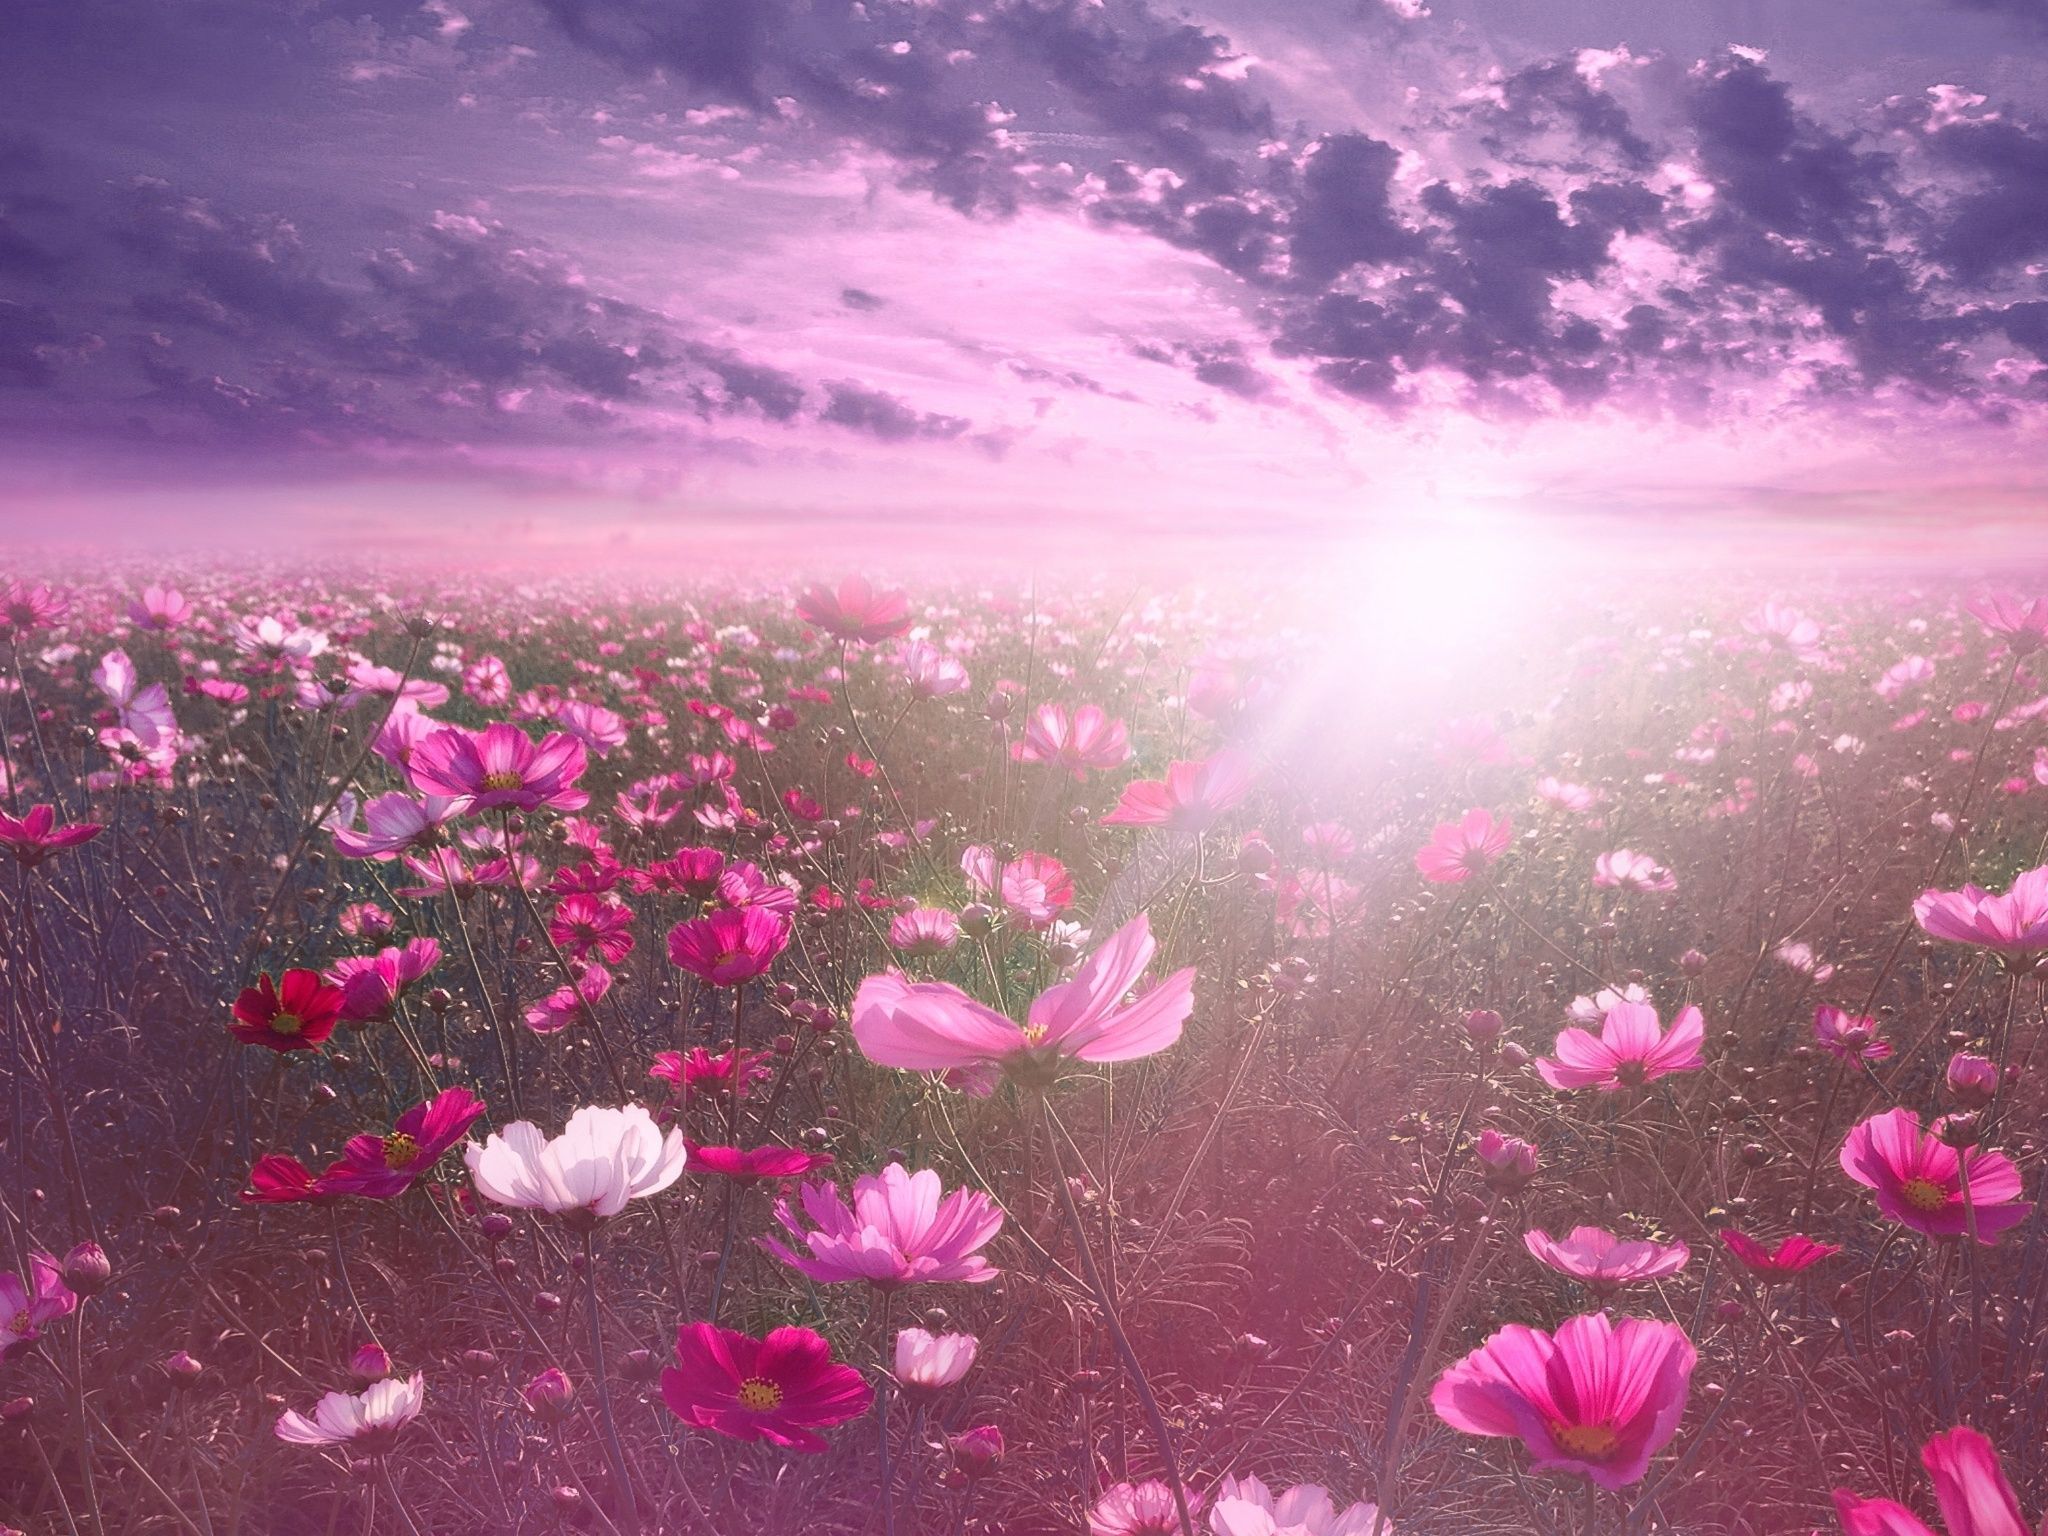 A field of pink flowers with the sun shining in the background. - Garden